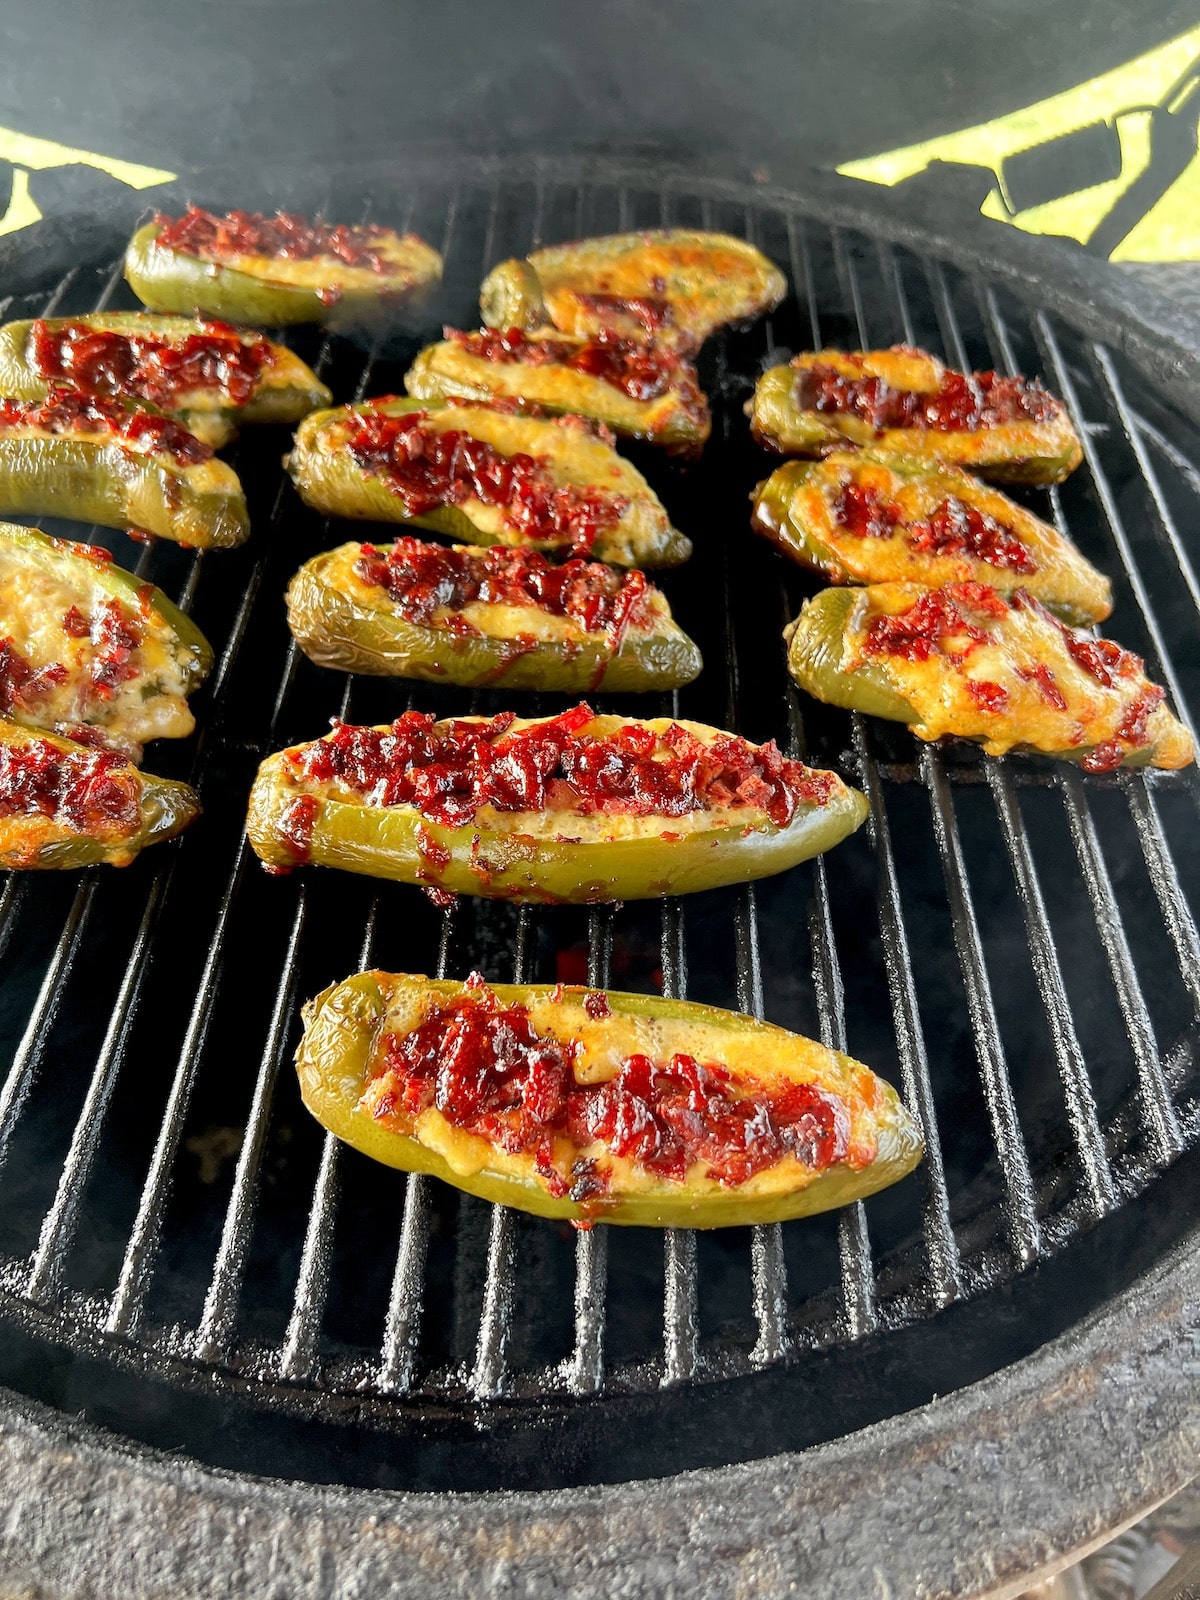 Jalapeno Poppers on a grill.